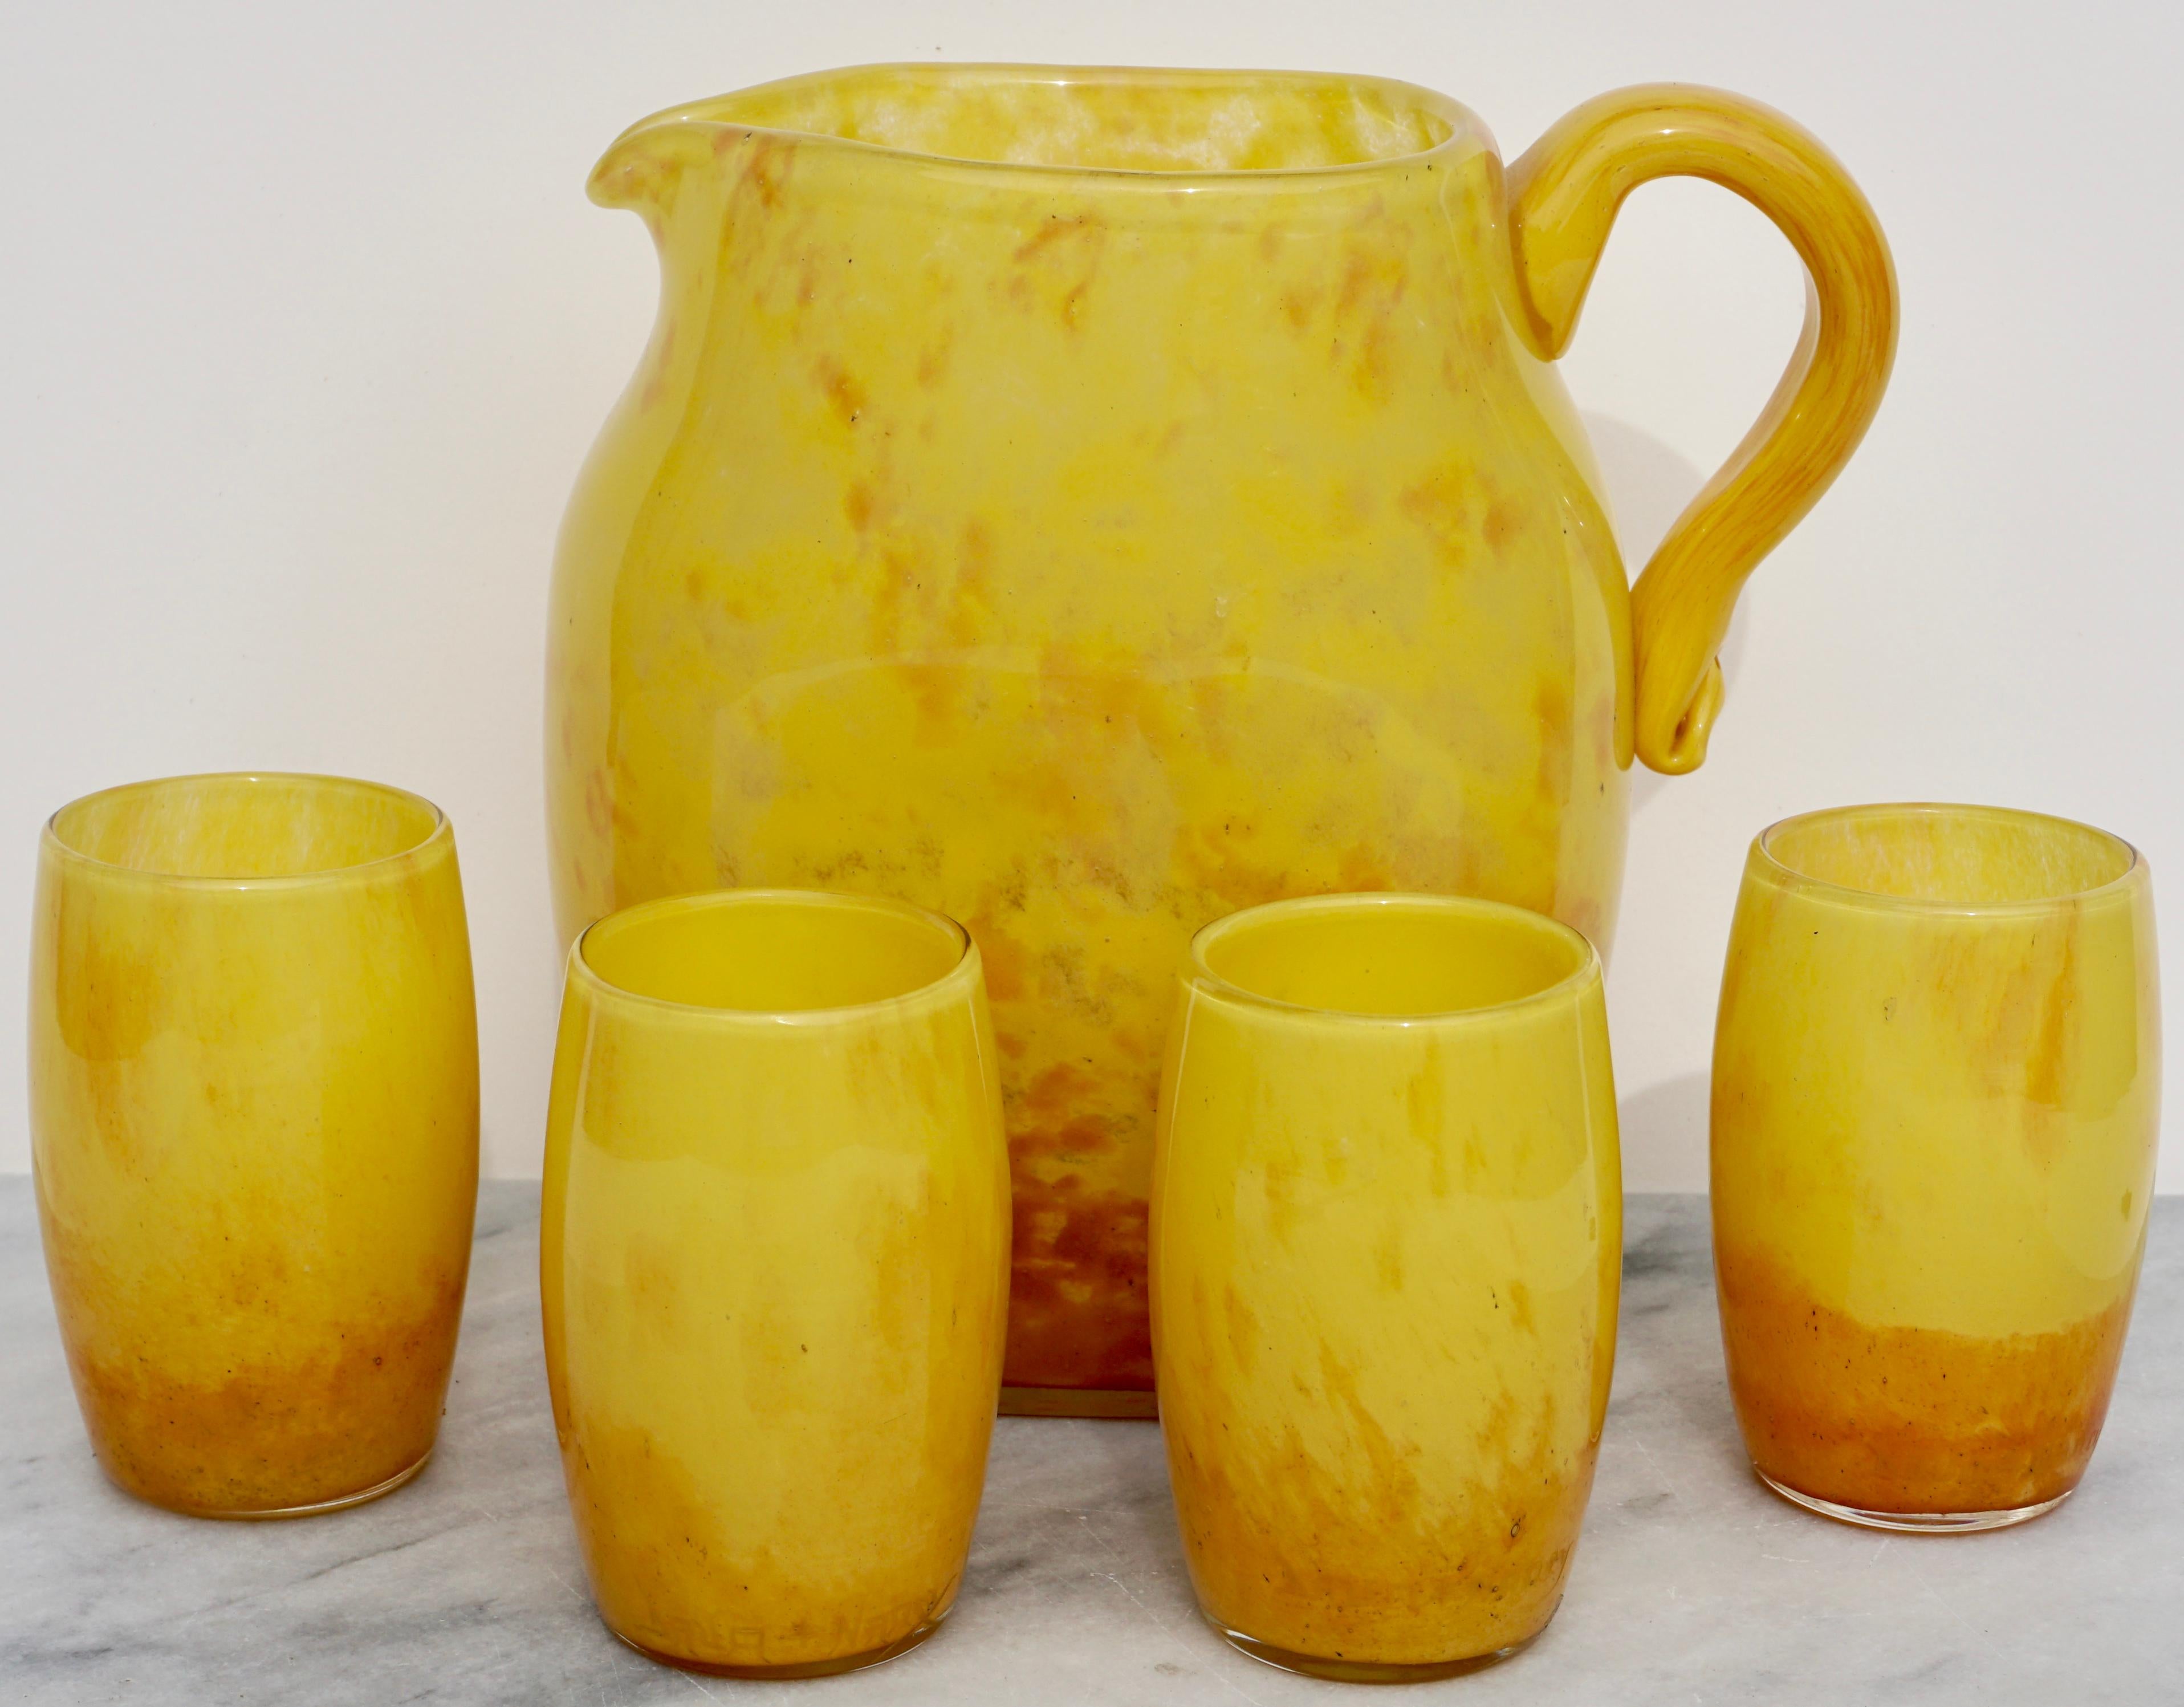 A sunshine yellow meets a sunset orange in this ombré variegated Daum Nancy glass Carafe et Verre ensemble. Anyone up for fresh lemonade or merry Sangria. Perfectly sized for a party of four; this one of a kind set has garnered positive responses